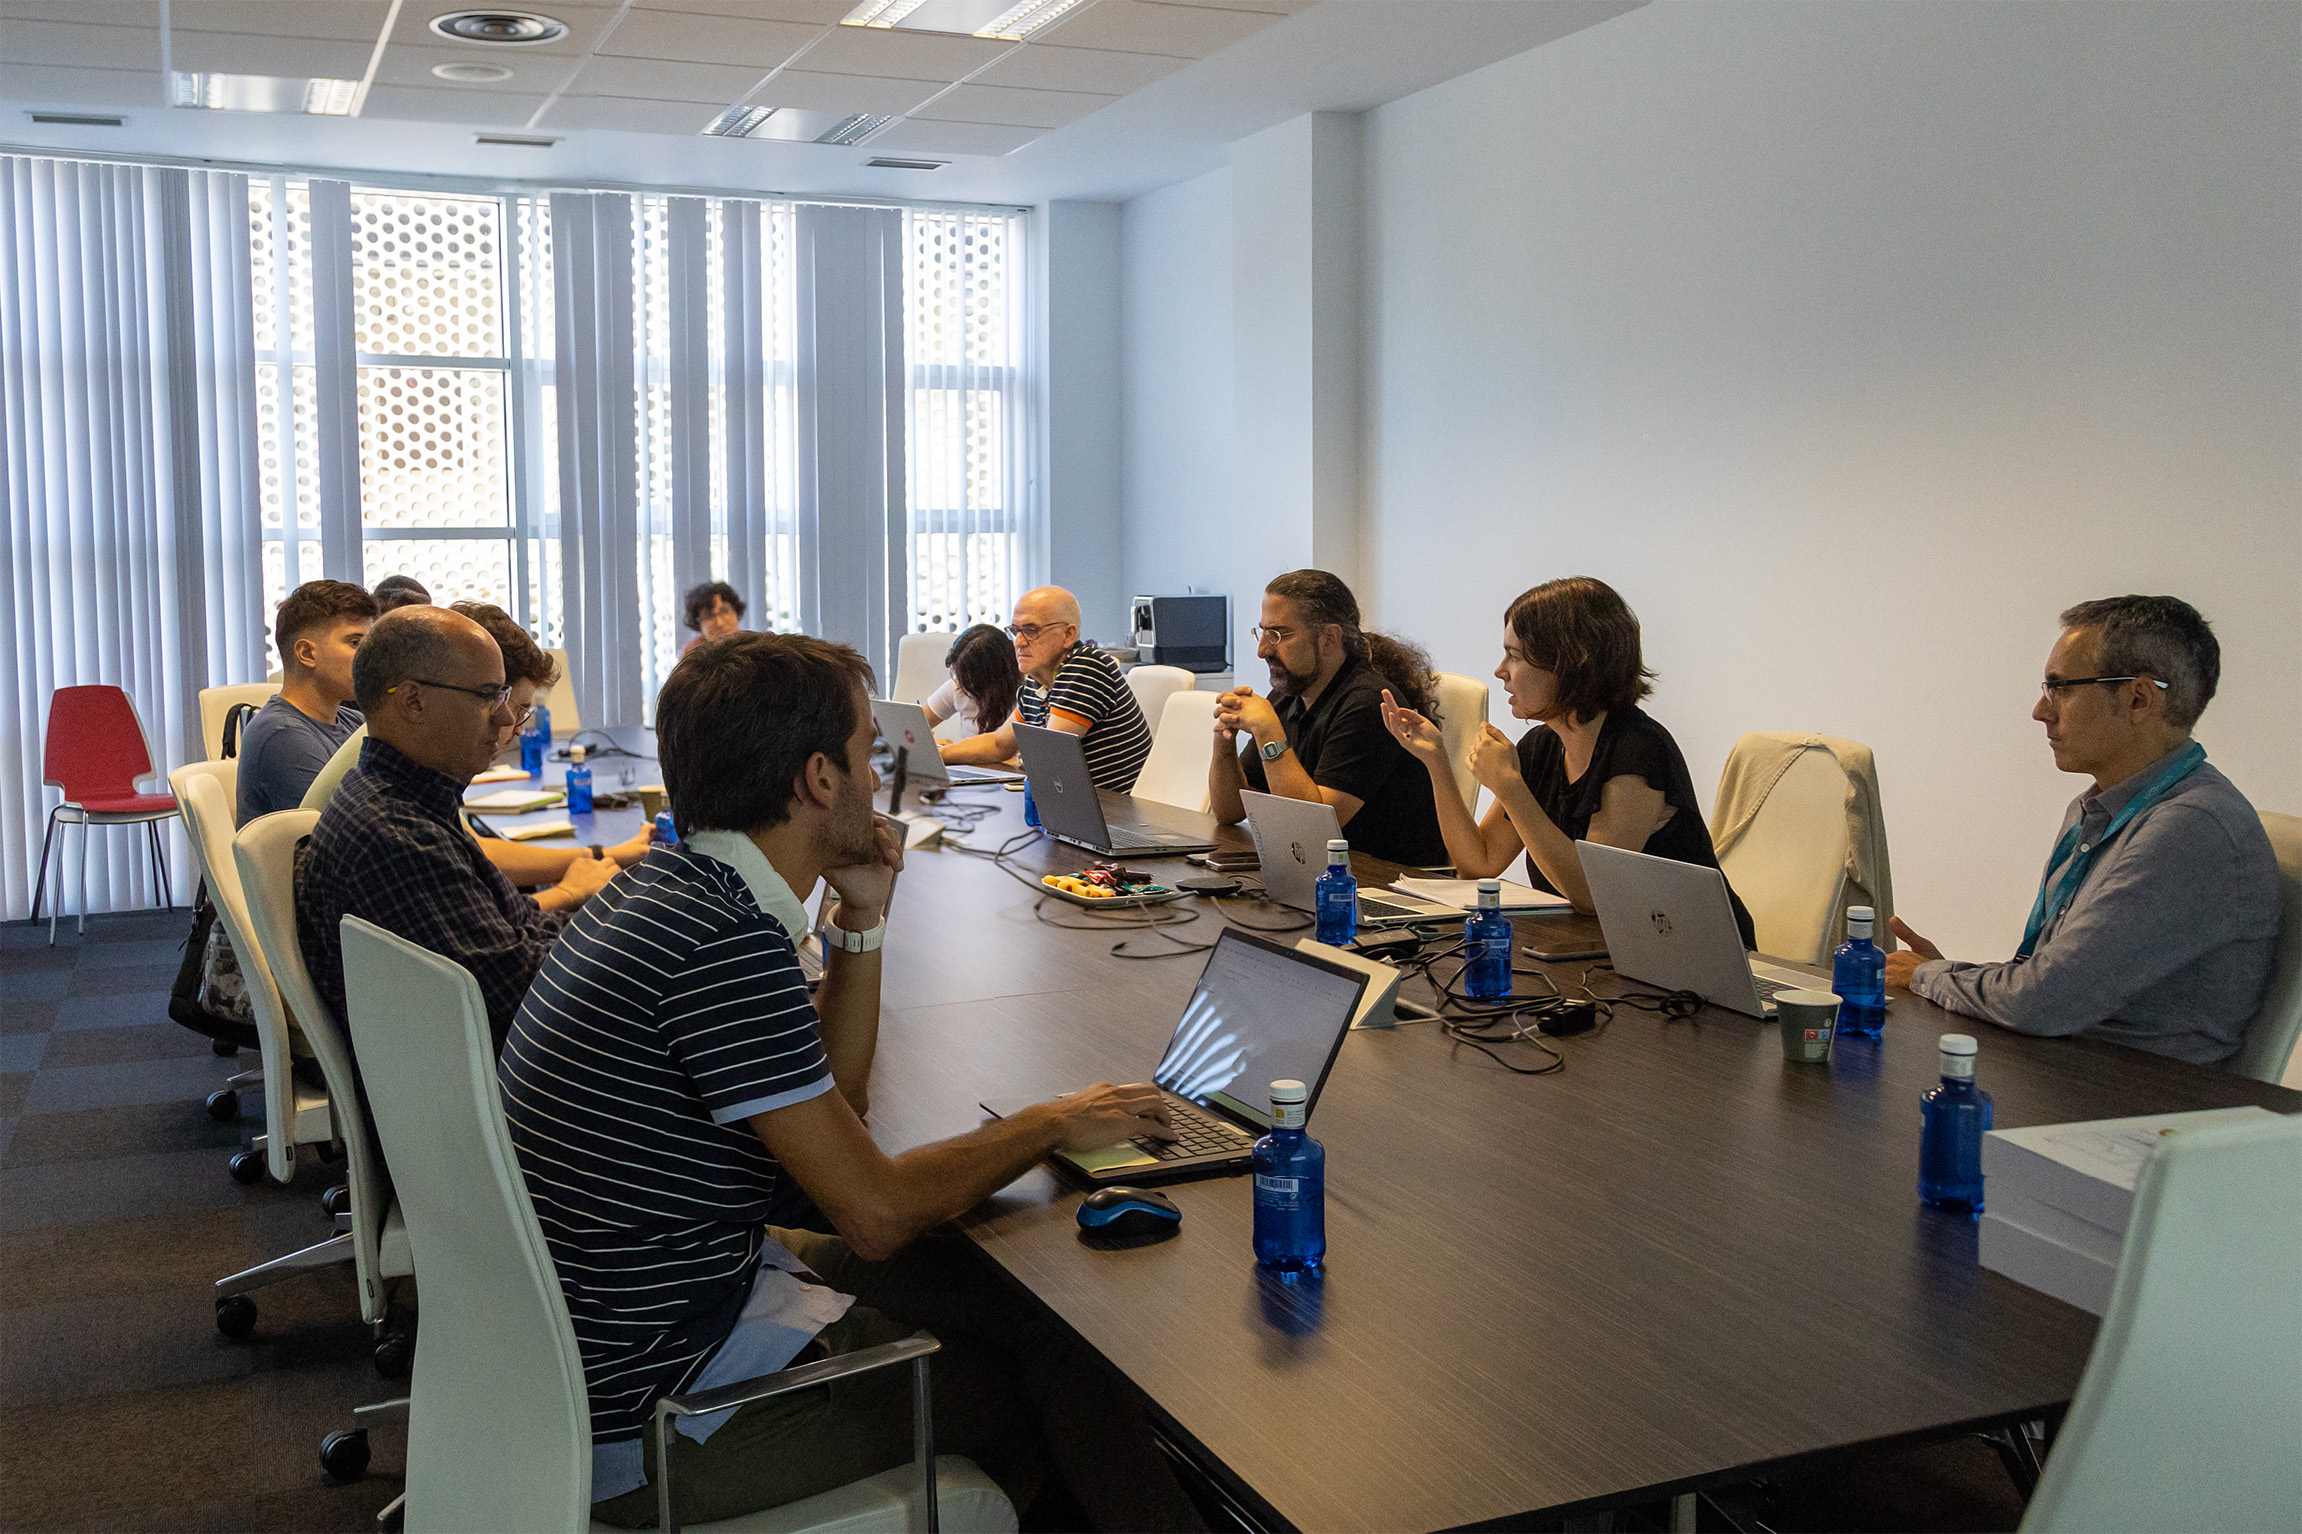 Vicomtech hosts in its facilities the first meeting of the AutoTrust project, based on the development of reliable Artificial Intelligence applied to the CCAM Autonomous Mobility sector.